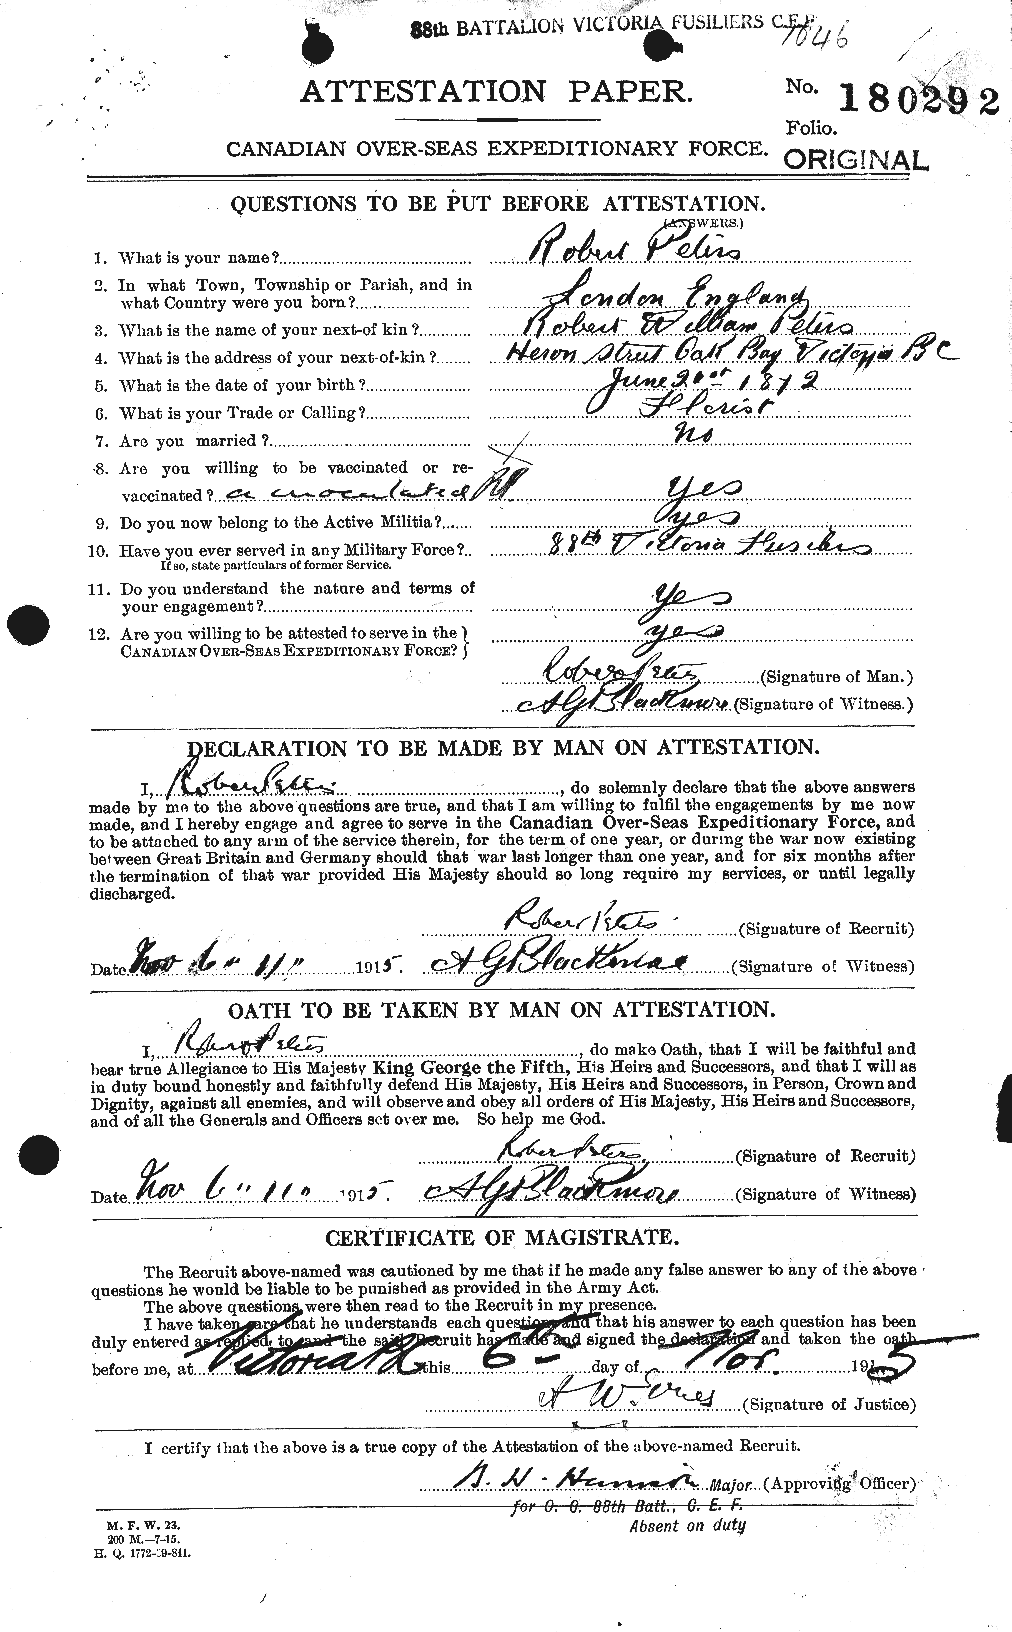 Personnel Records of the First World War - CEF 575611a